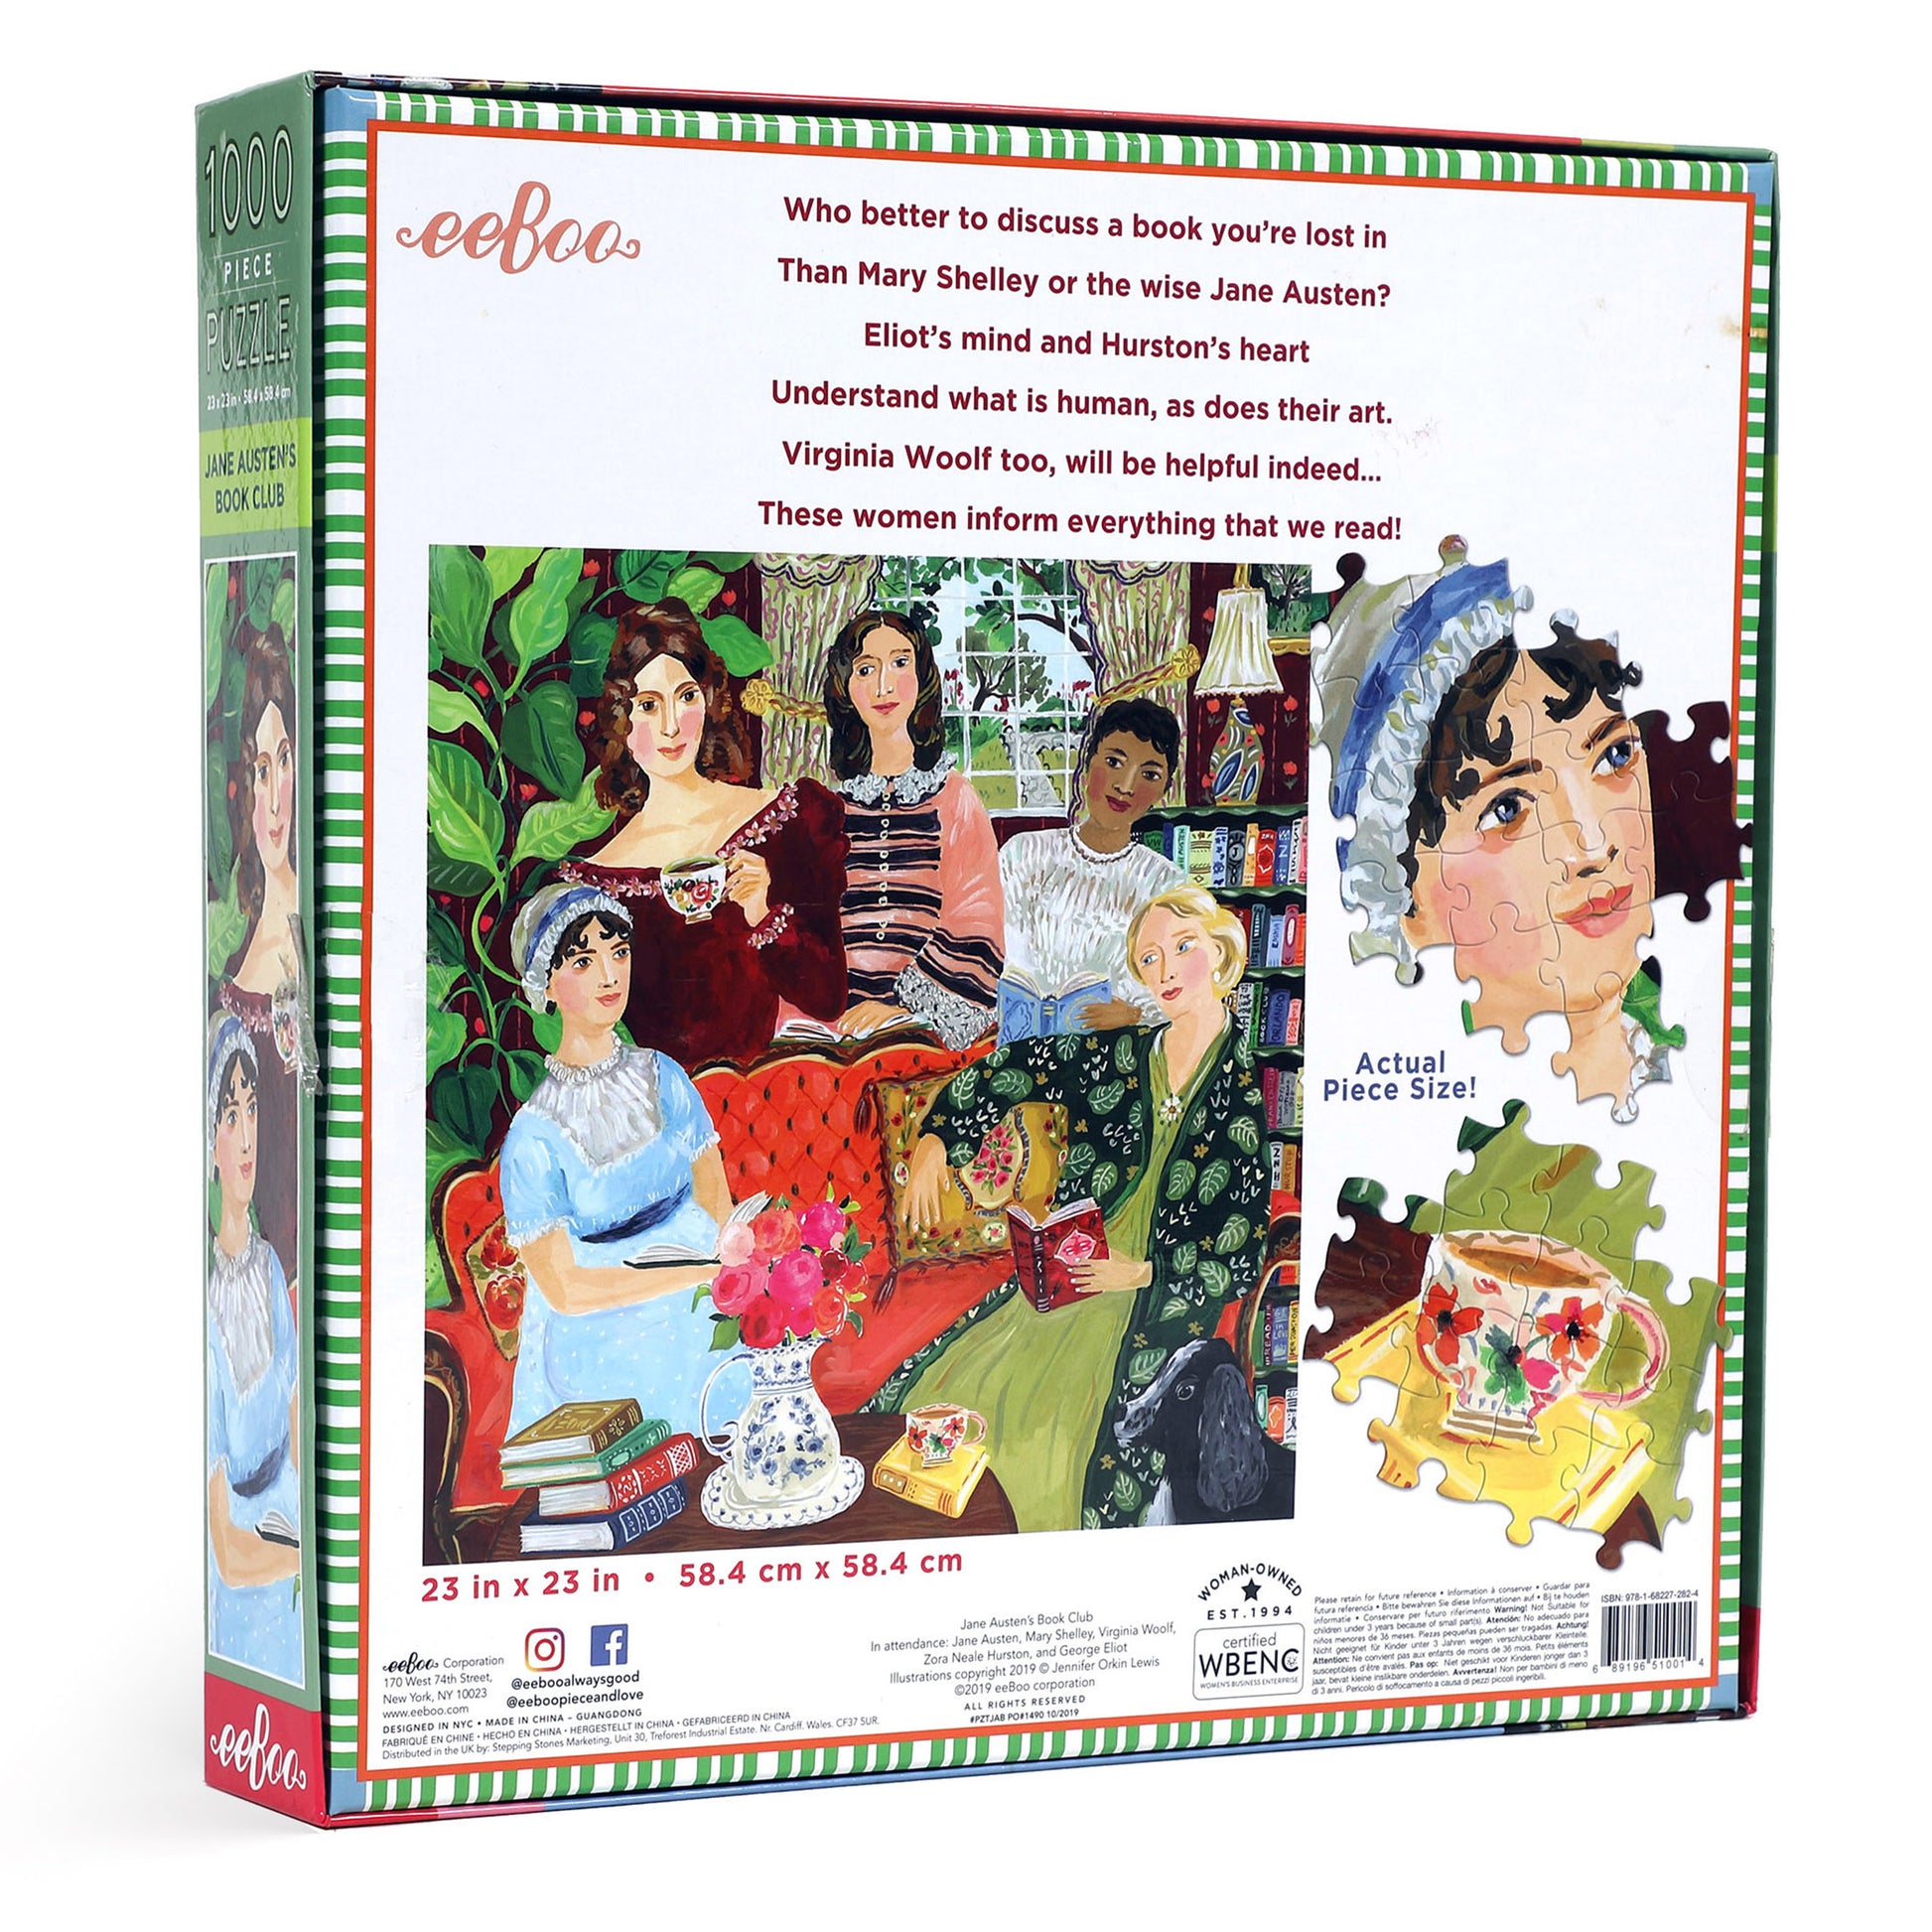 Jane Austen's Book Club 1000 Piece Jigsaw Puzzle | eeBoo Piece & Love | Gifts for Literary Readers